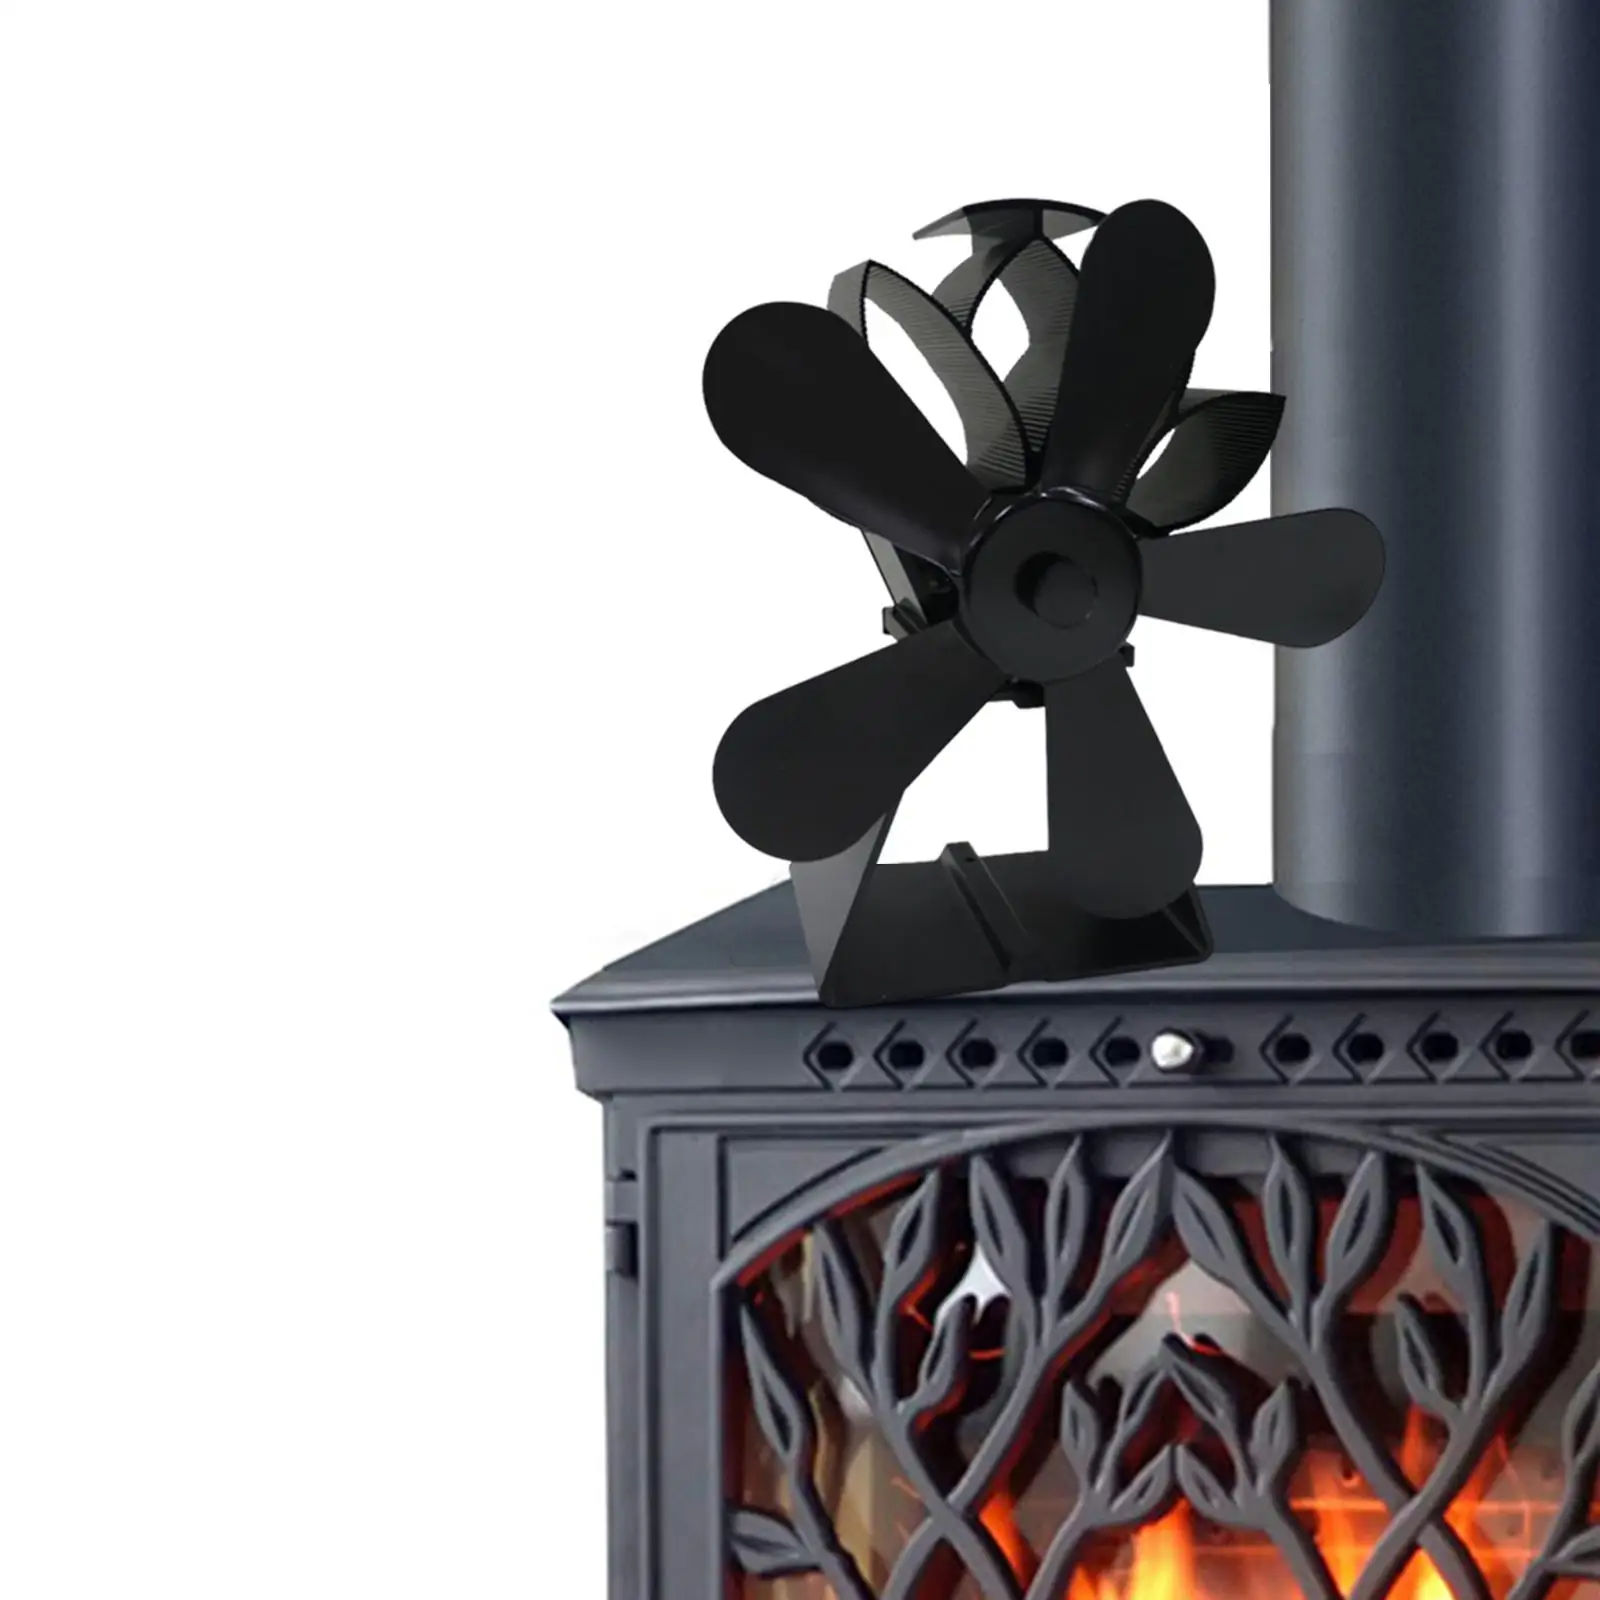 Five Vanes Fireplace Fan, Wood Log Burner Household Circulates Warm Save Fuel, Eco Fan Non Electric Heat Powered Stovetop Fan